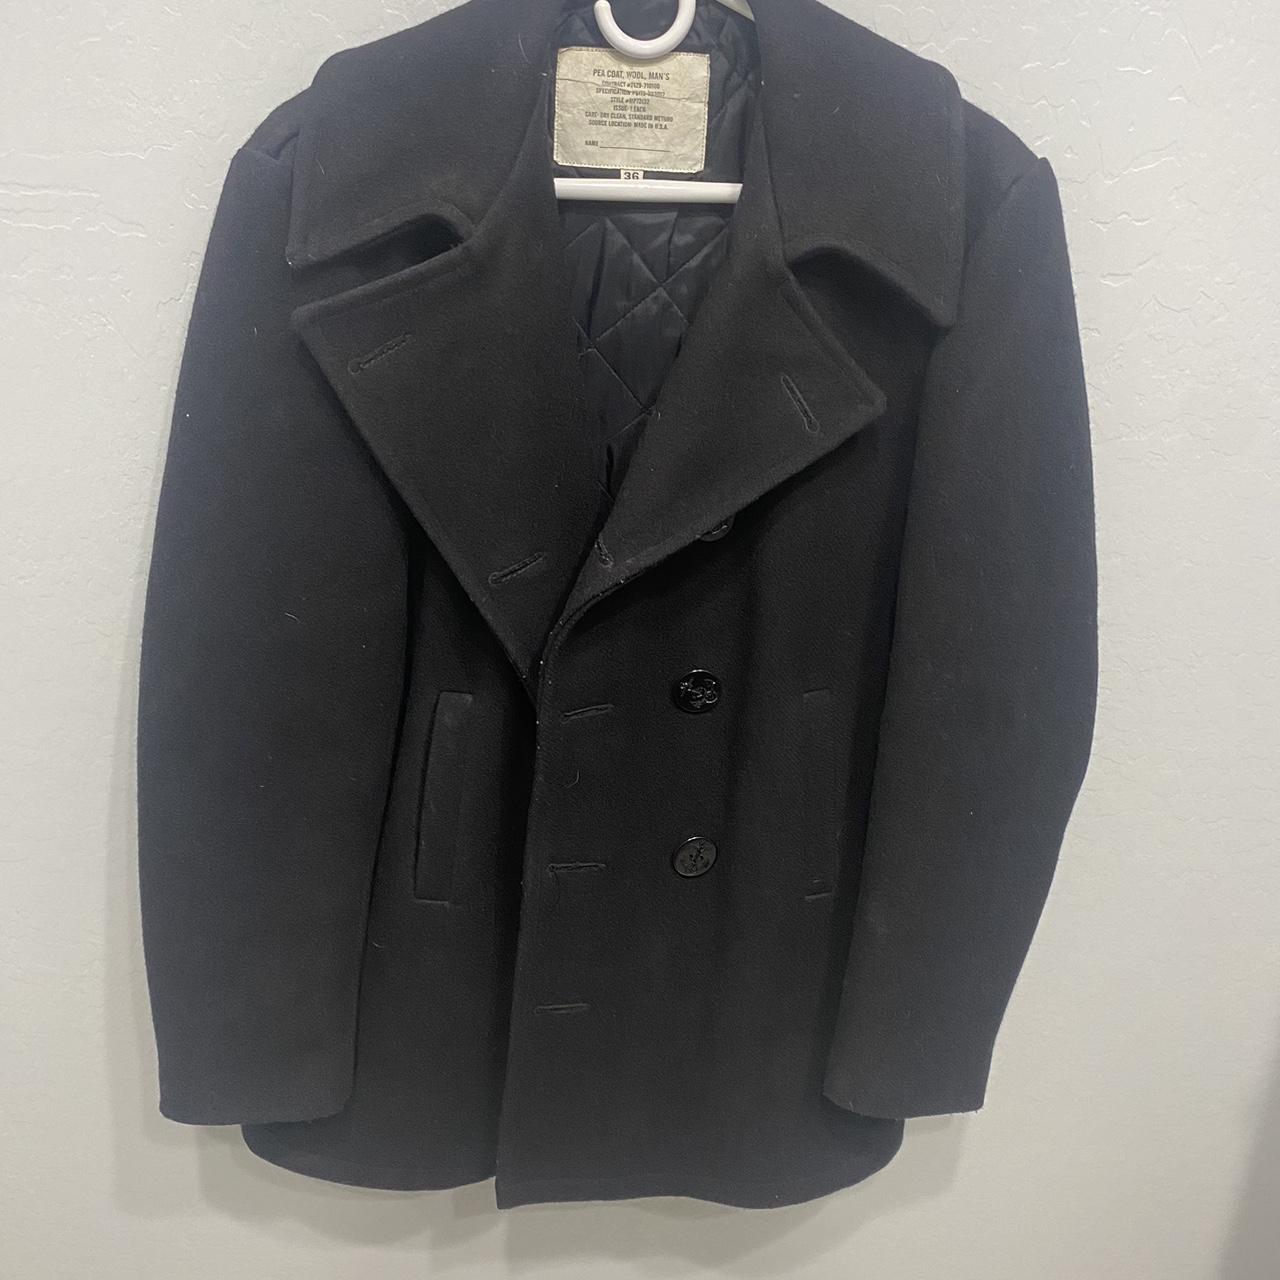 Got this beautiful very heavy weight pea coat A... - Depop